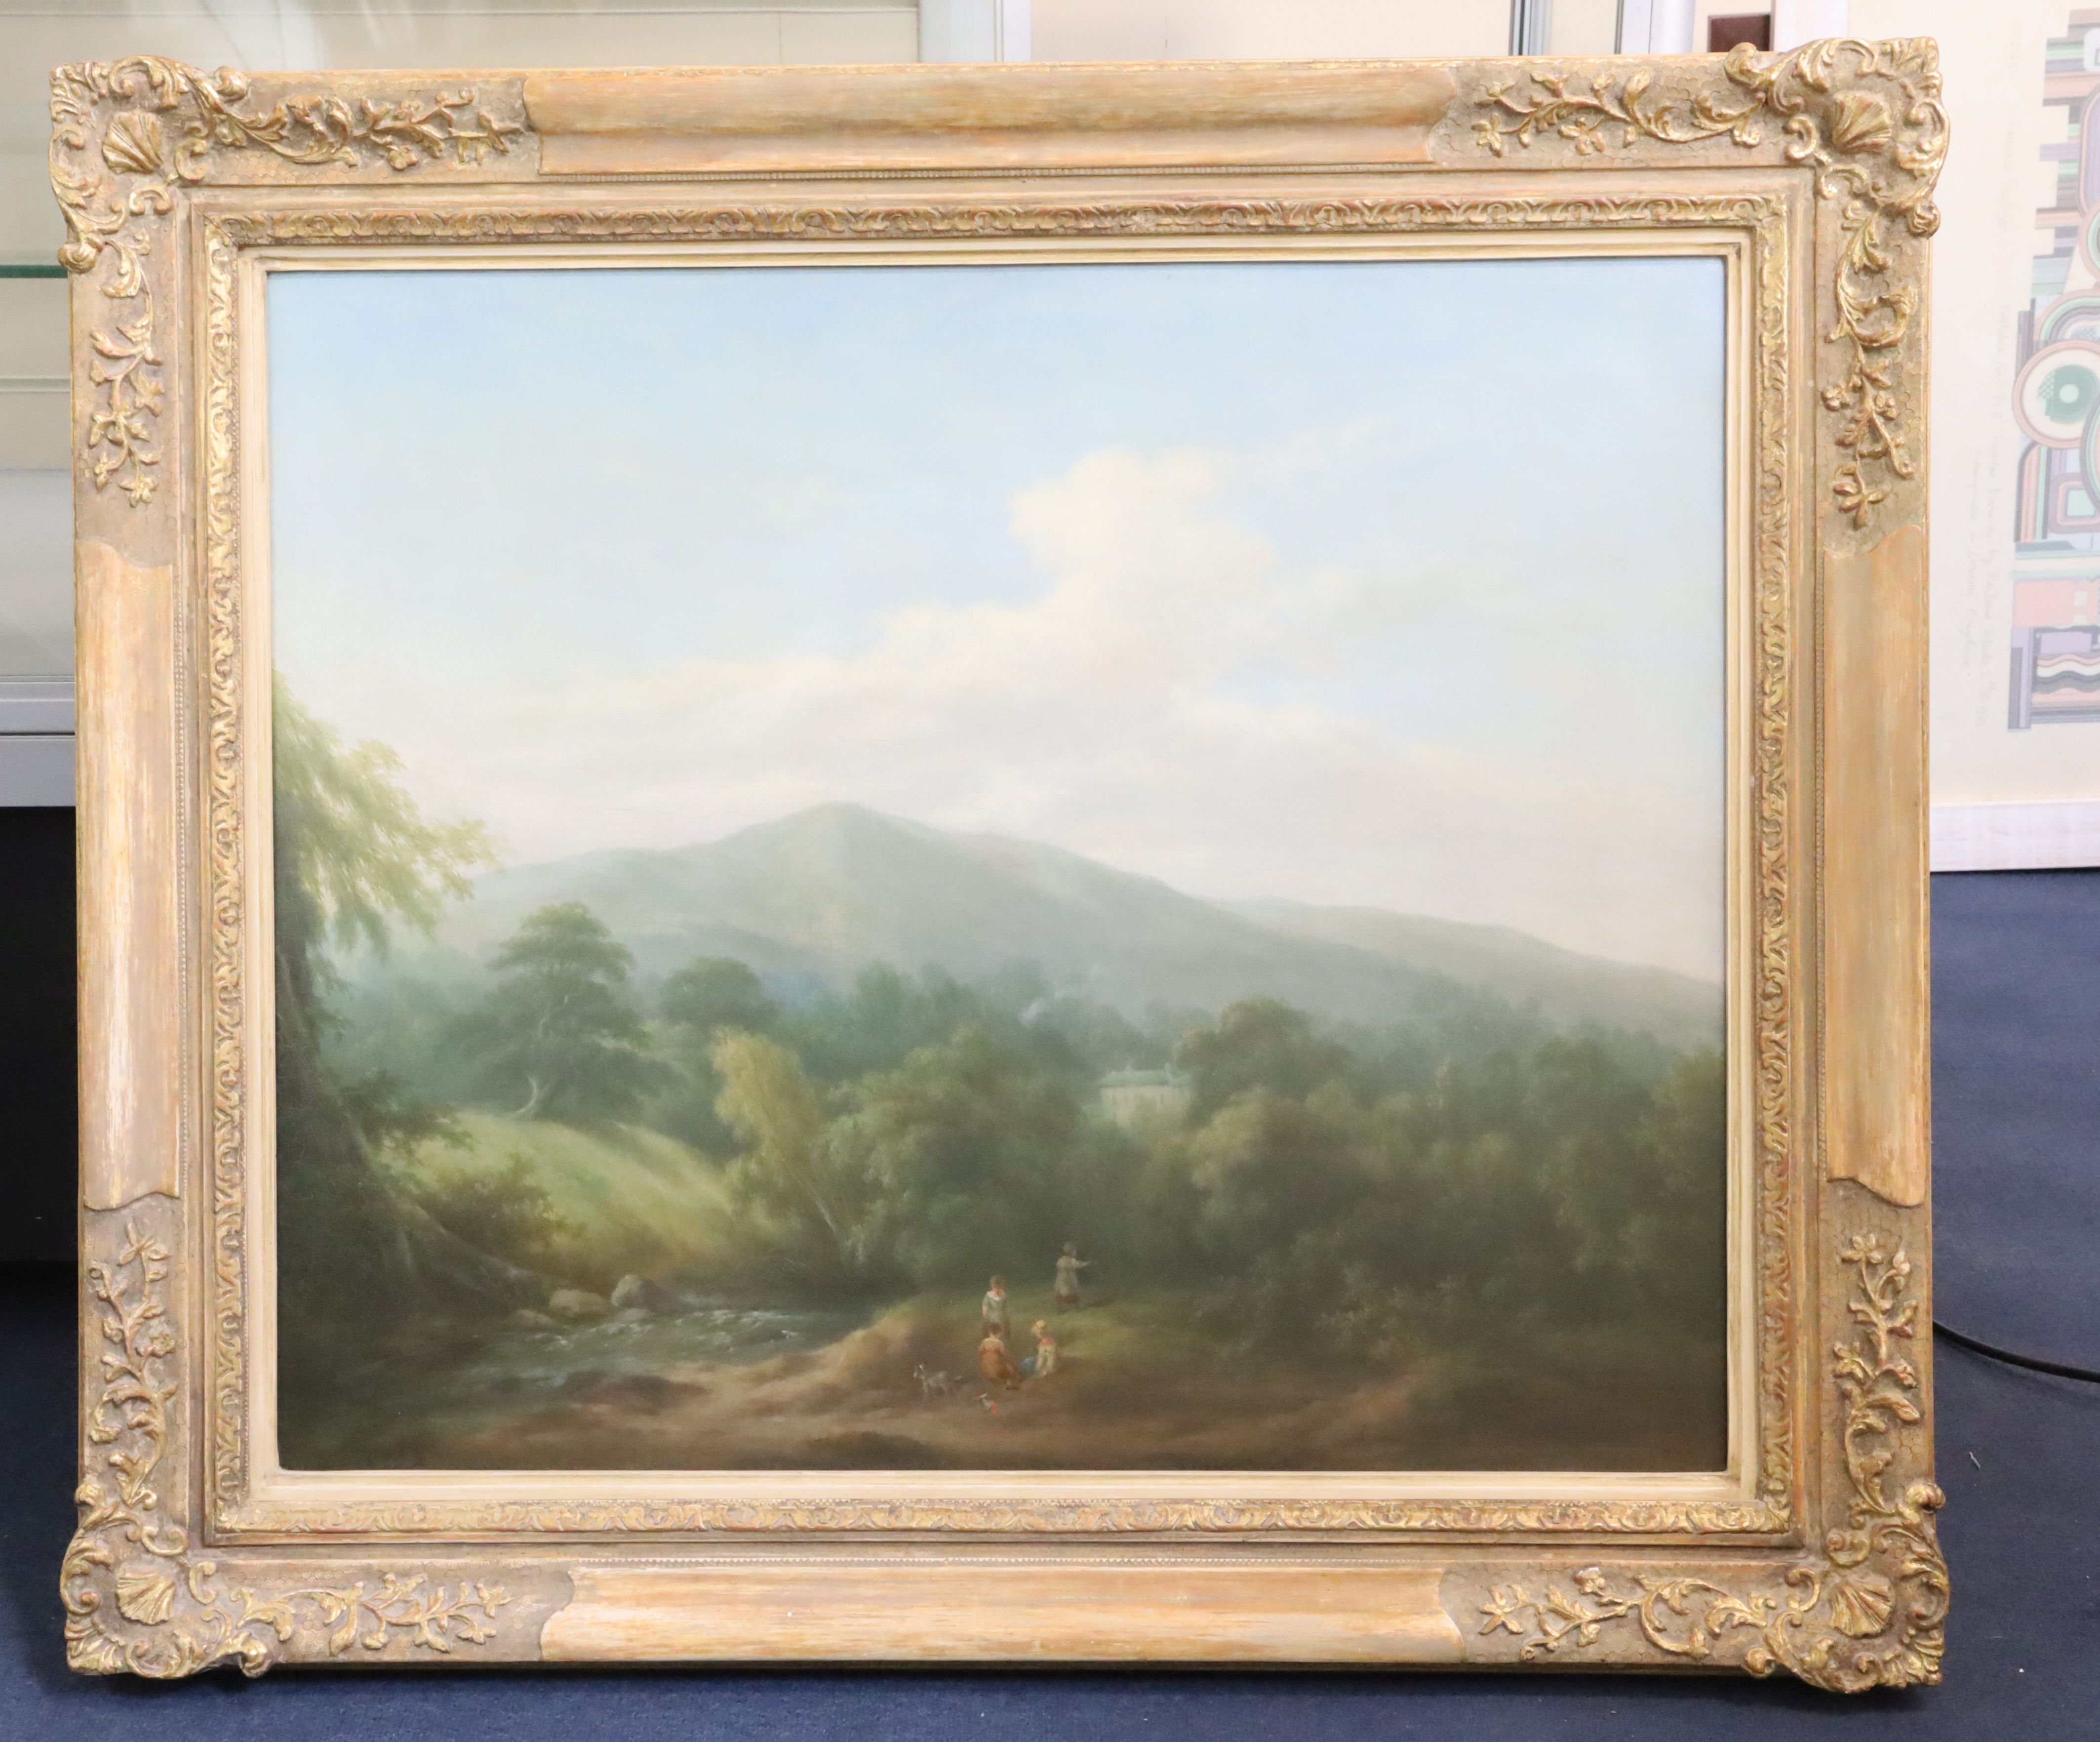 19th century English Schooloil on canvasChildren at play in an extensive landscape24.25 x 29.25in. - Image 2 of 3